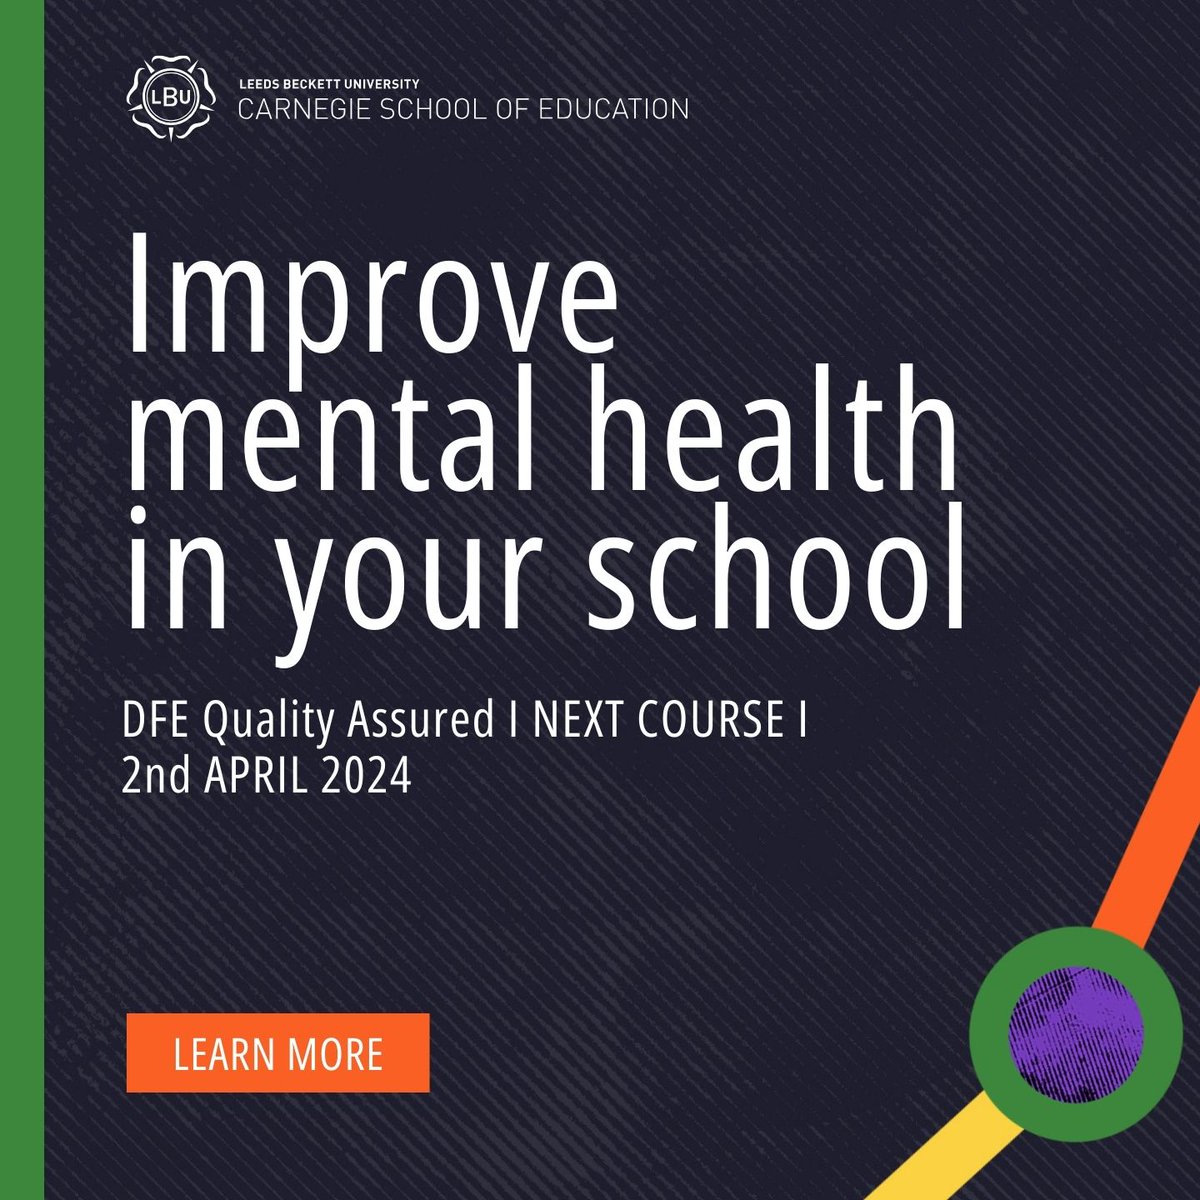 WANTED: School leaders on a mission to improve student and staff well-being! 🌟 Are you ready to create a positive mental health culture in your school? Secure your spot on our DfE-funded Senior Mental Health Lead training starting on 2nd April 2024! ow.ly/FV4V50QKJh8